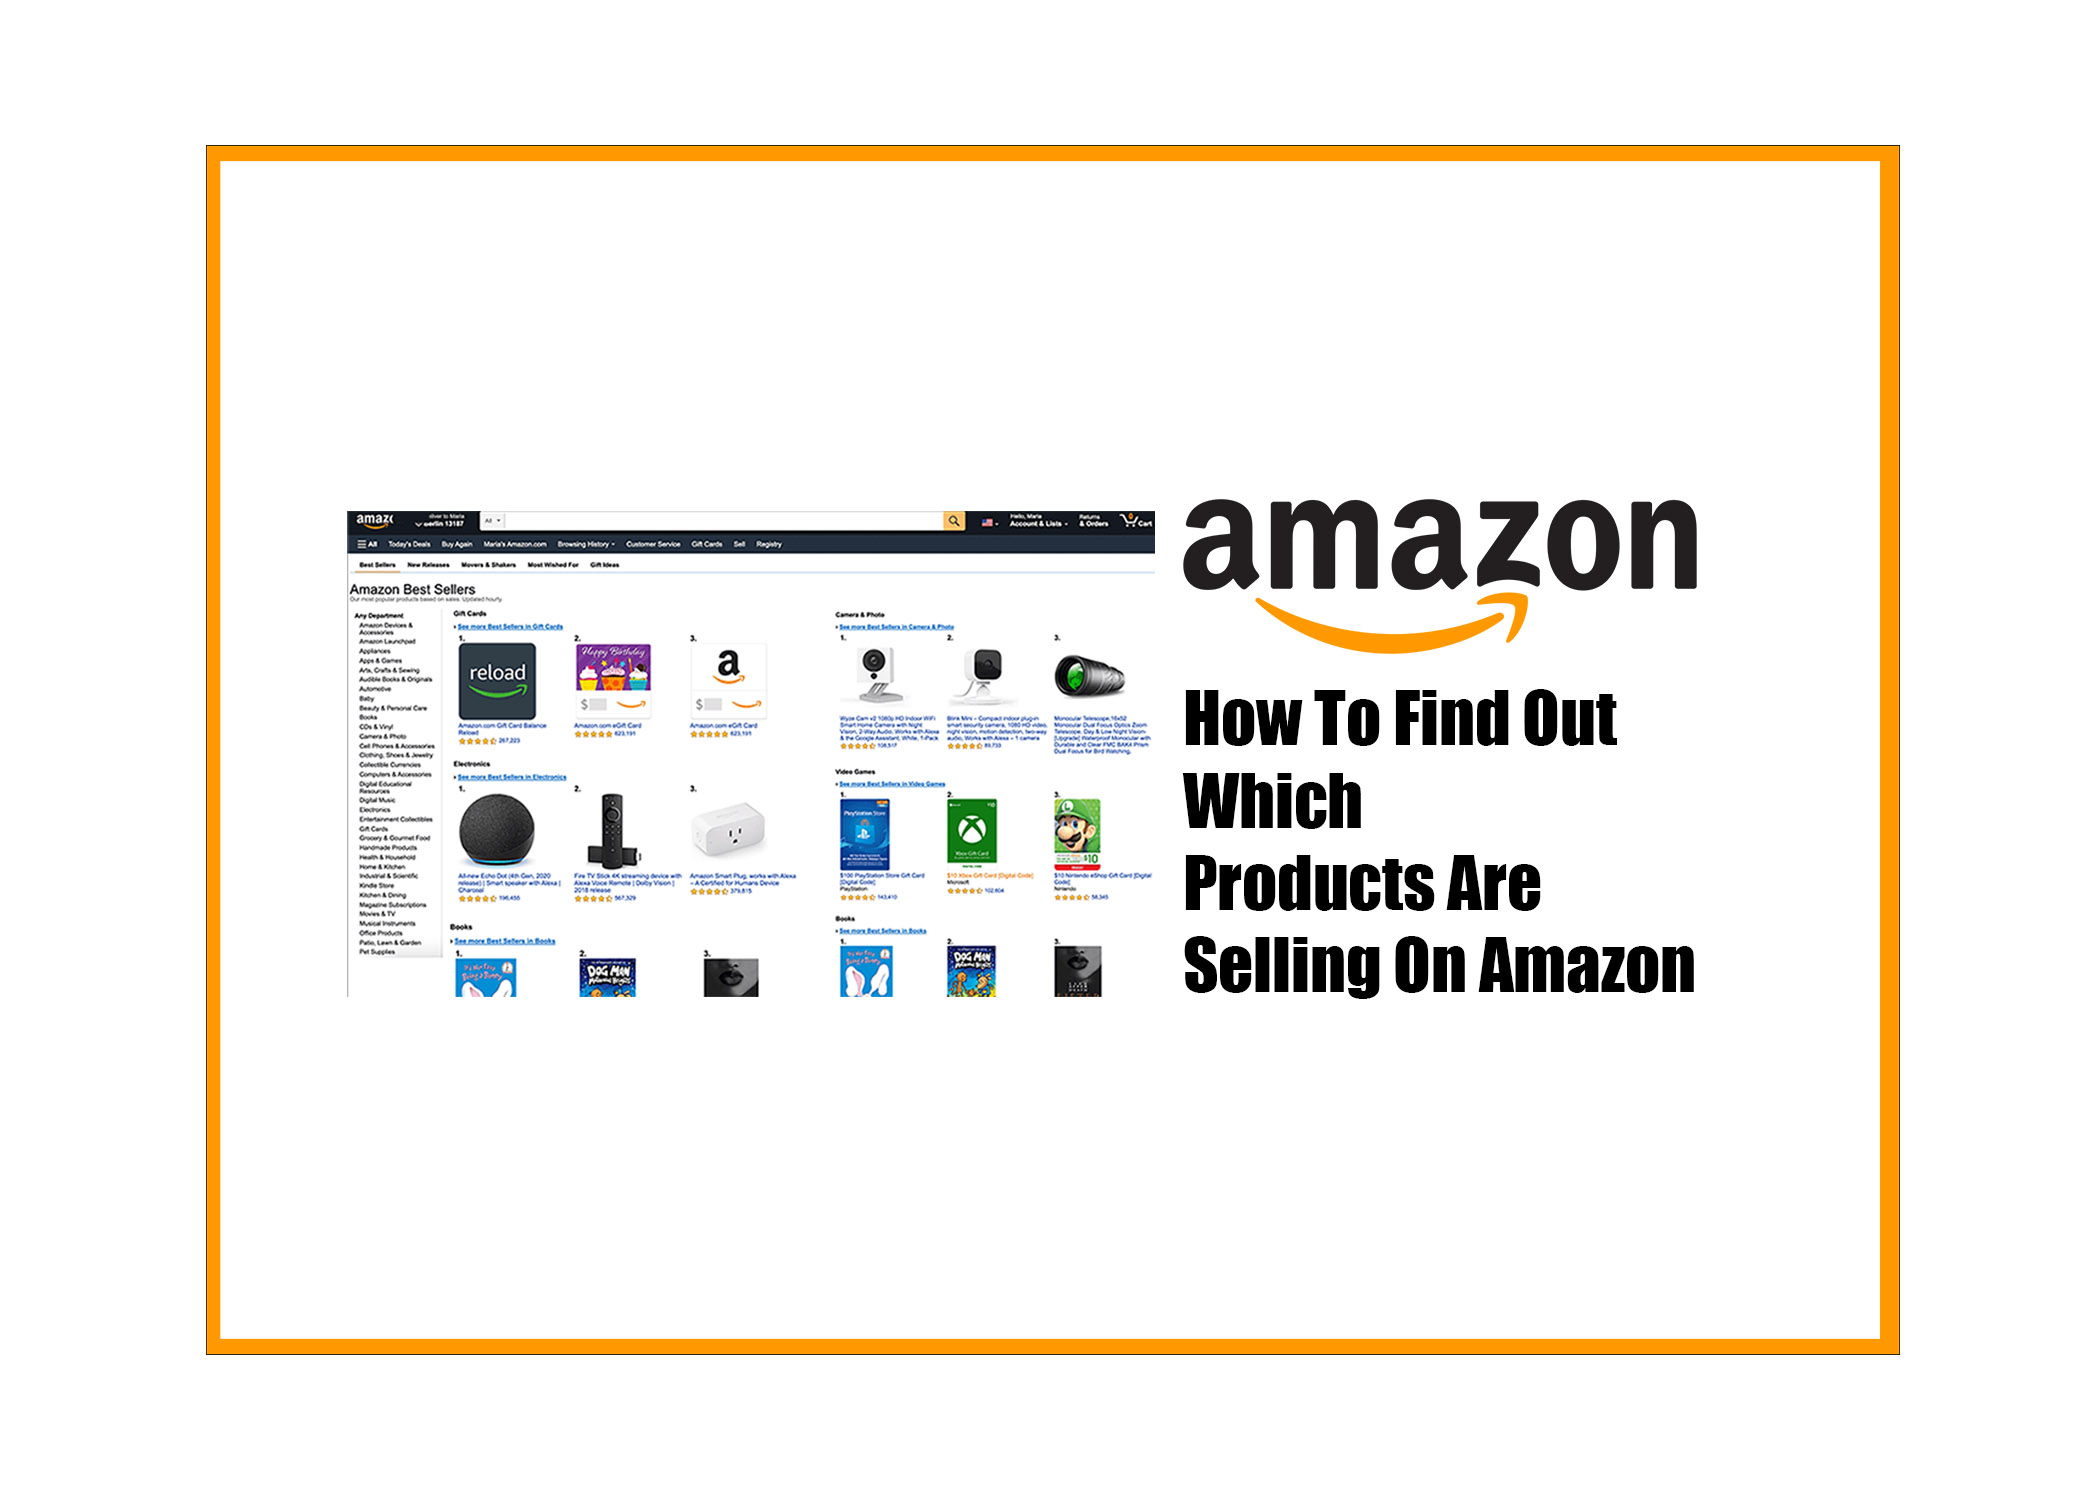 How To Find Out Which Products Are Selling On Amazon